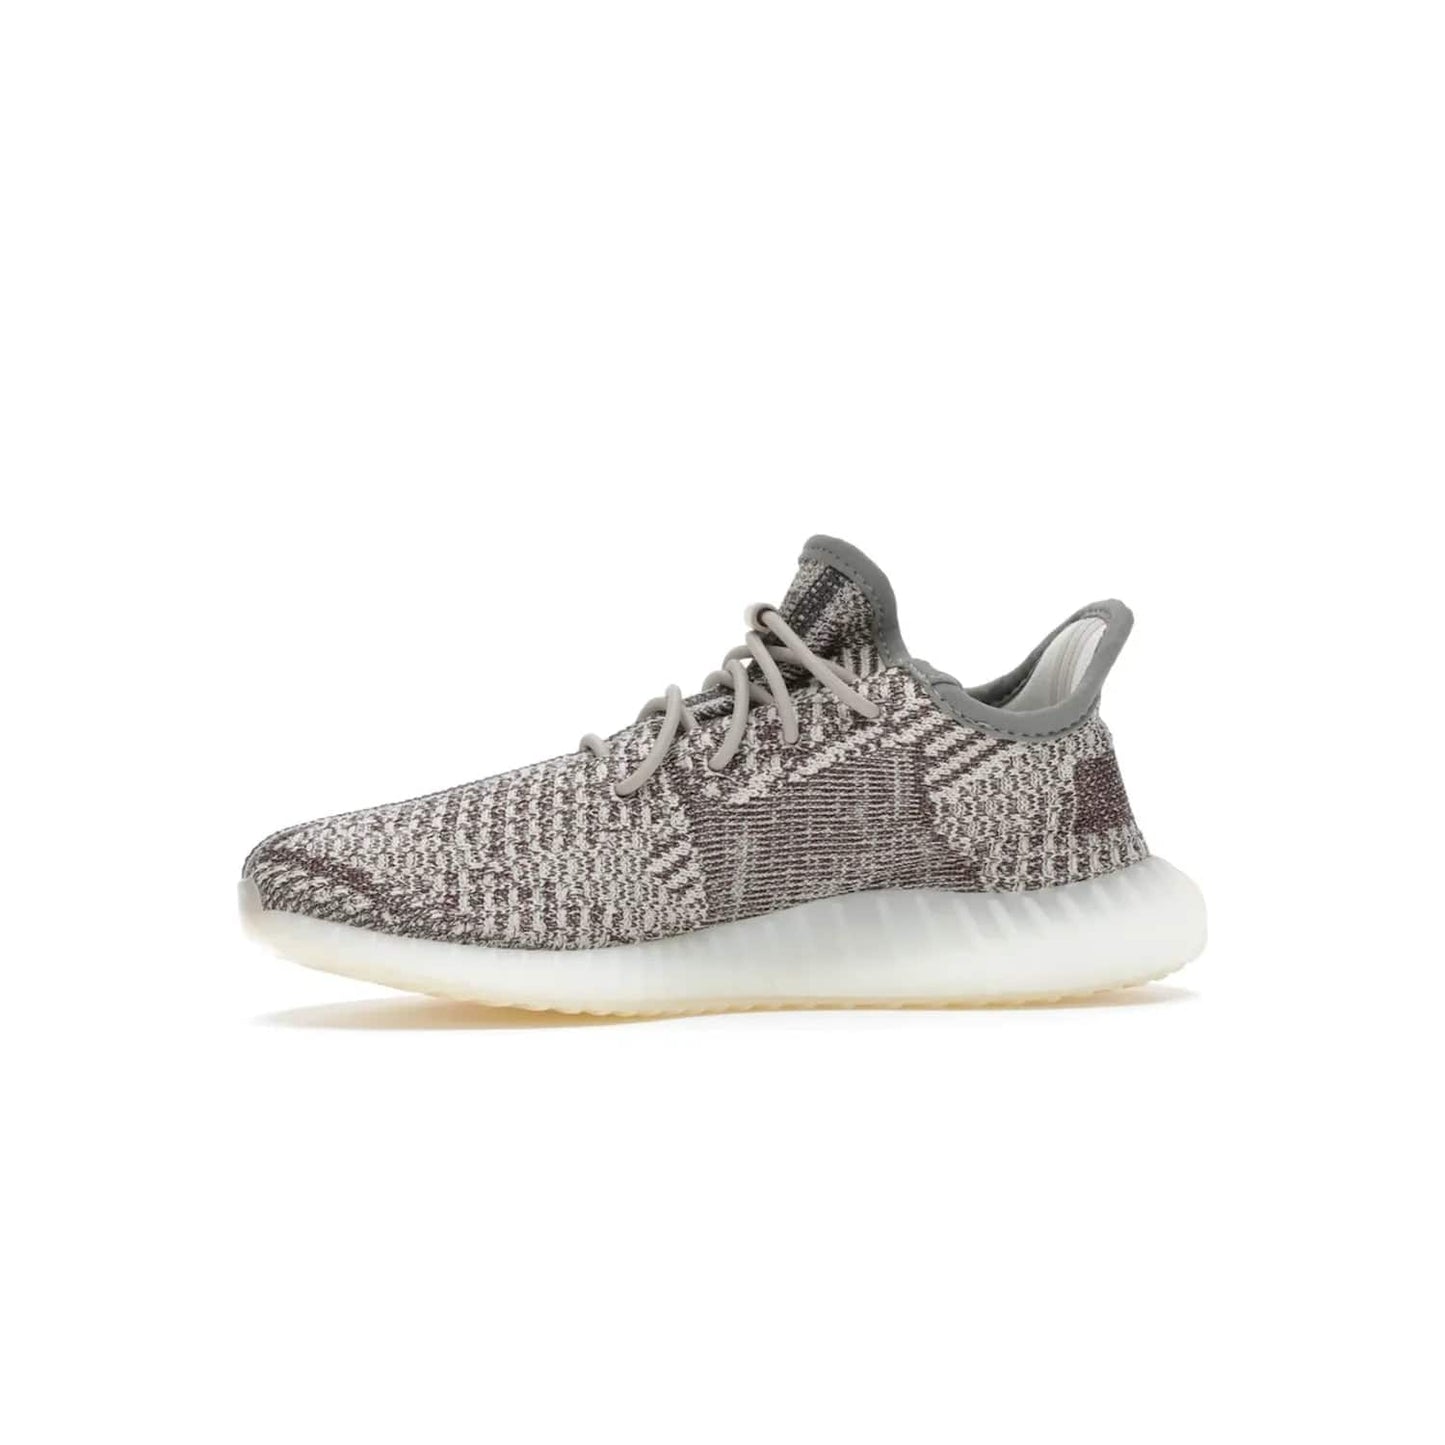 adidas Yeezy Boost 350 V2 Zyon (Kids) - Image 18 - Only at www.BallersClubKickz.com - The adidas Yeezy Boost 350 V2 Zyon (Kids) - perfect pick for fashion-savvy kids. Features soft Primeknit upper, lace closure & colorful patterning. Comfort & style for kids' summer outfits!